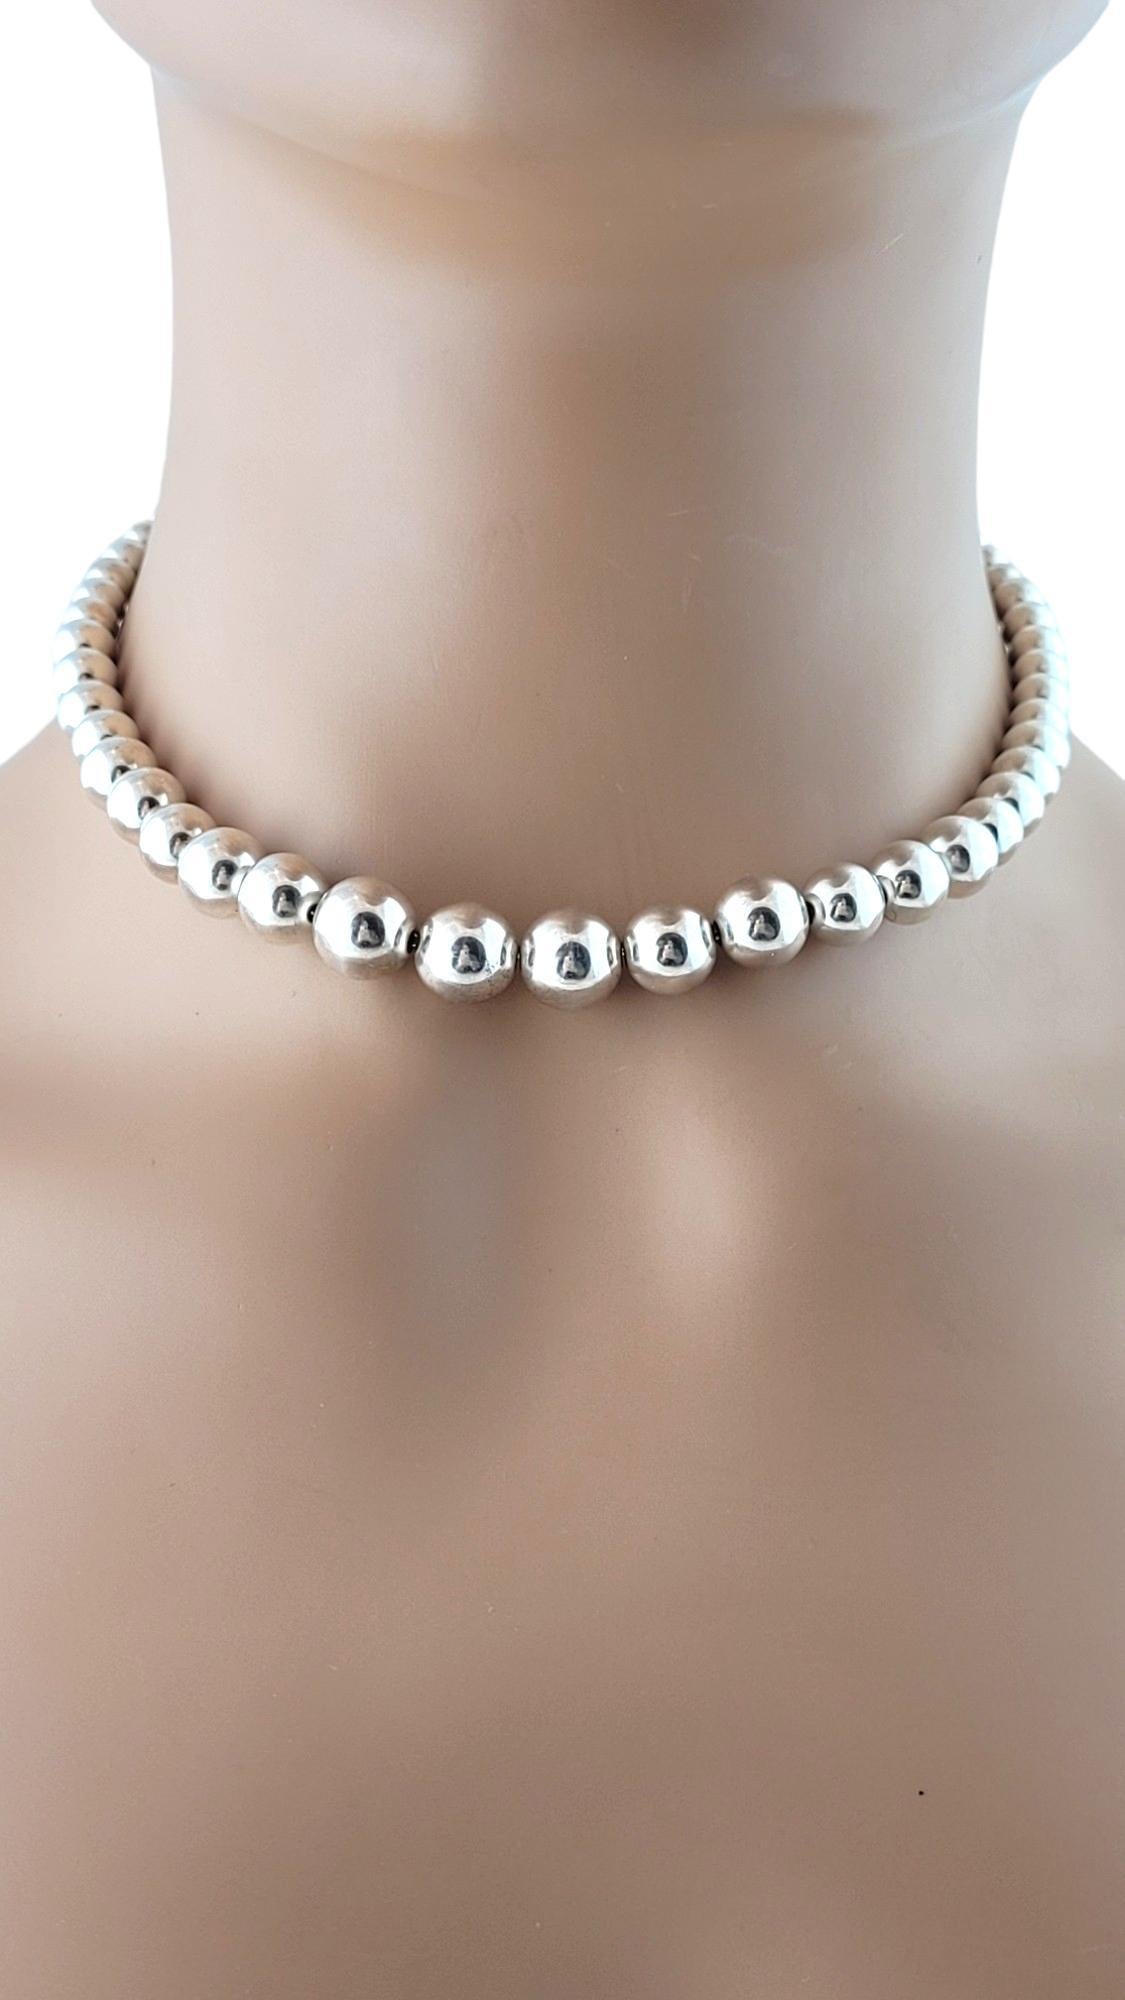 Tiffany & Co Sterling Silver Bead Necklace #16430 For Sale 3